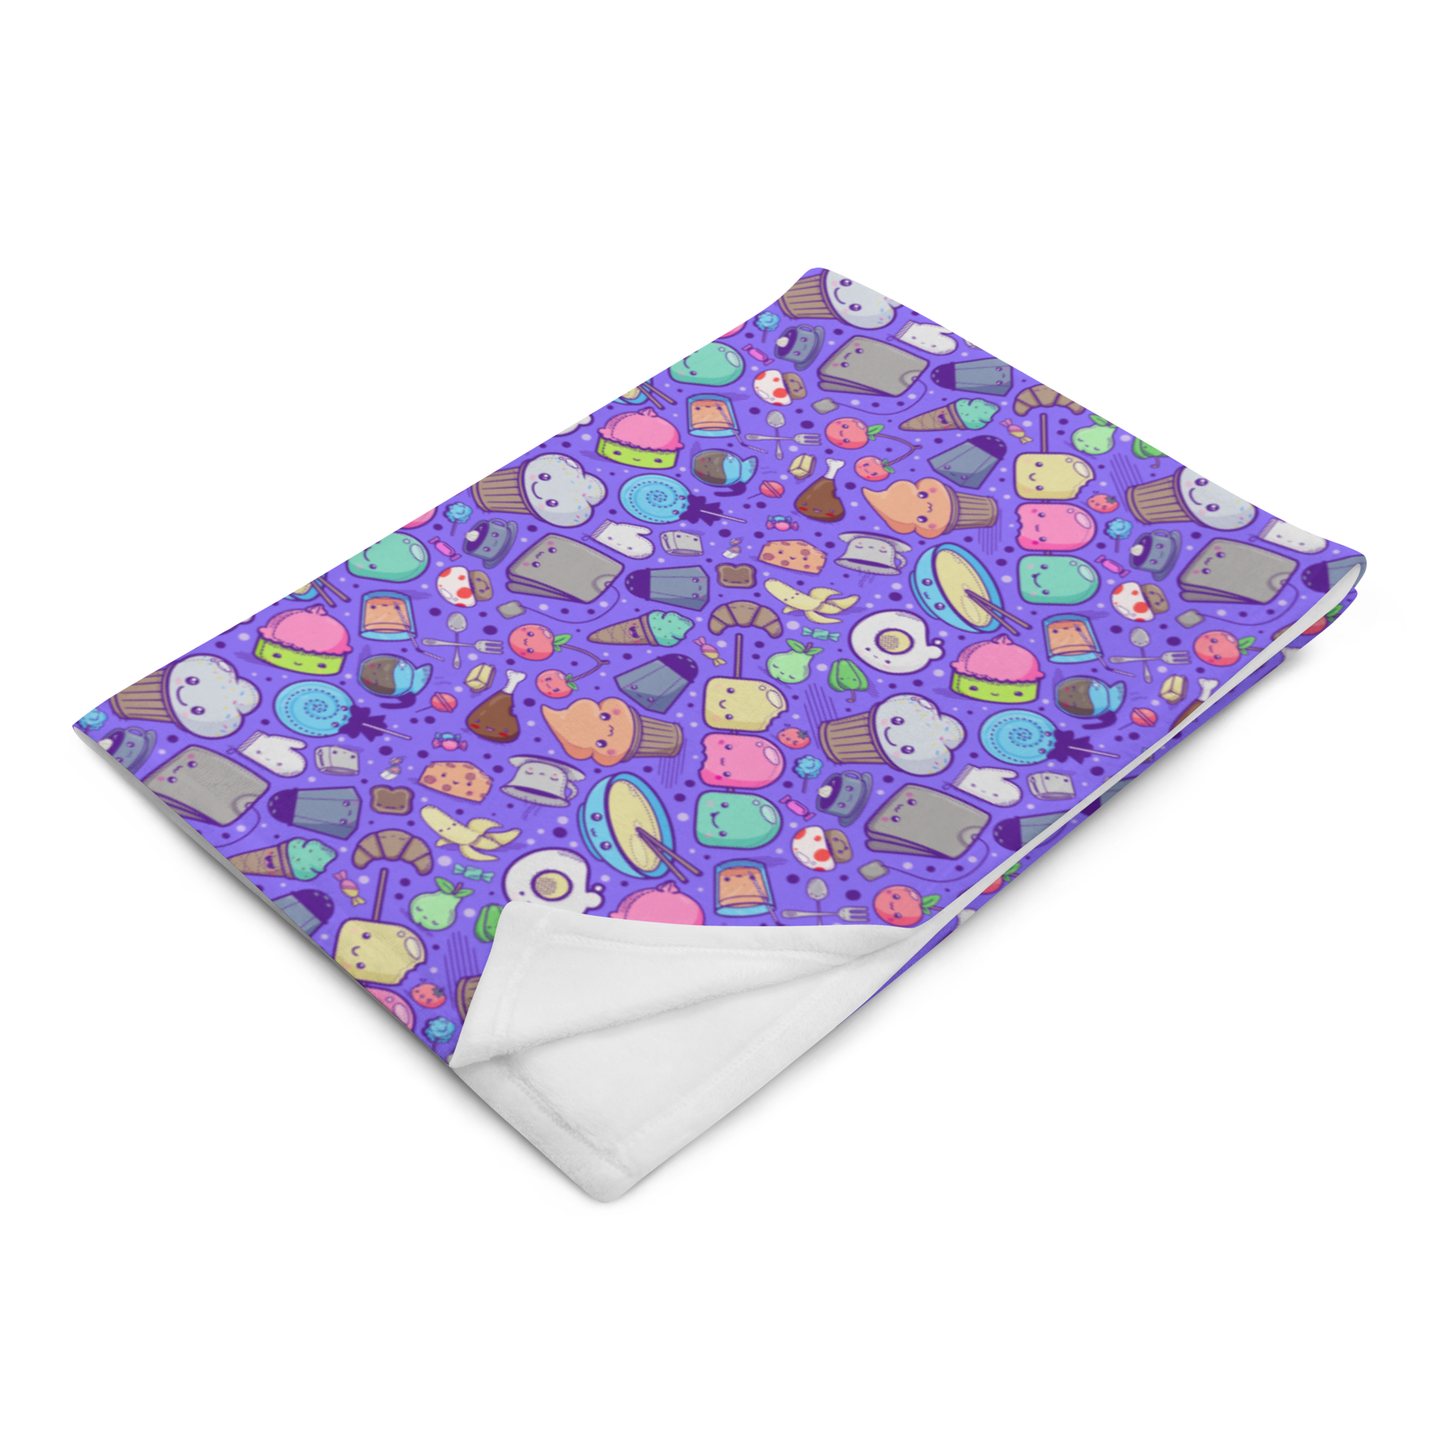 Kawaii Throw Blanket, Adorable Food Pattern Blanket for Kids and Adults